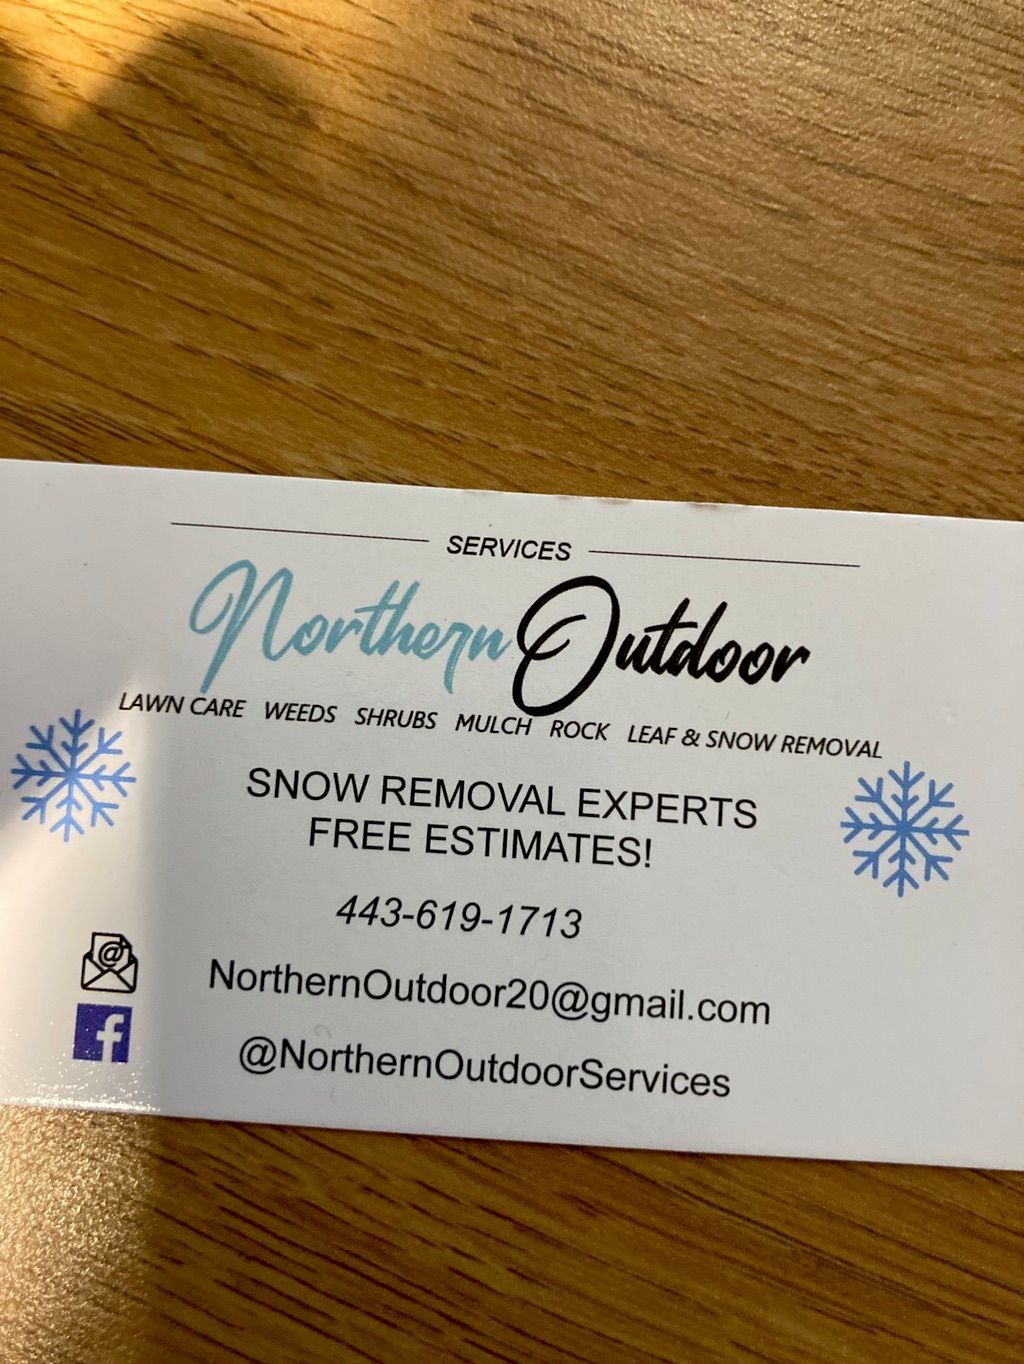 Northern Outdoor Services